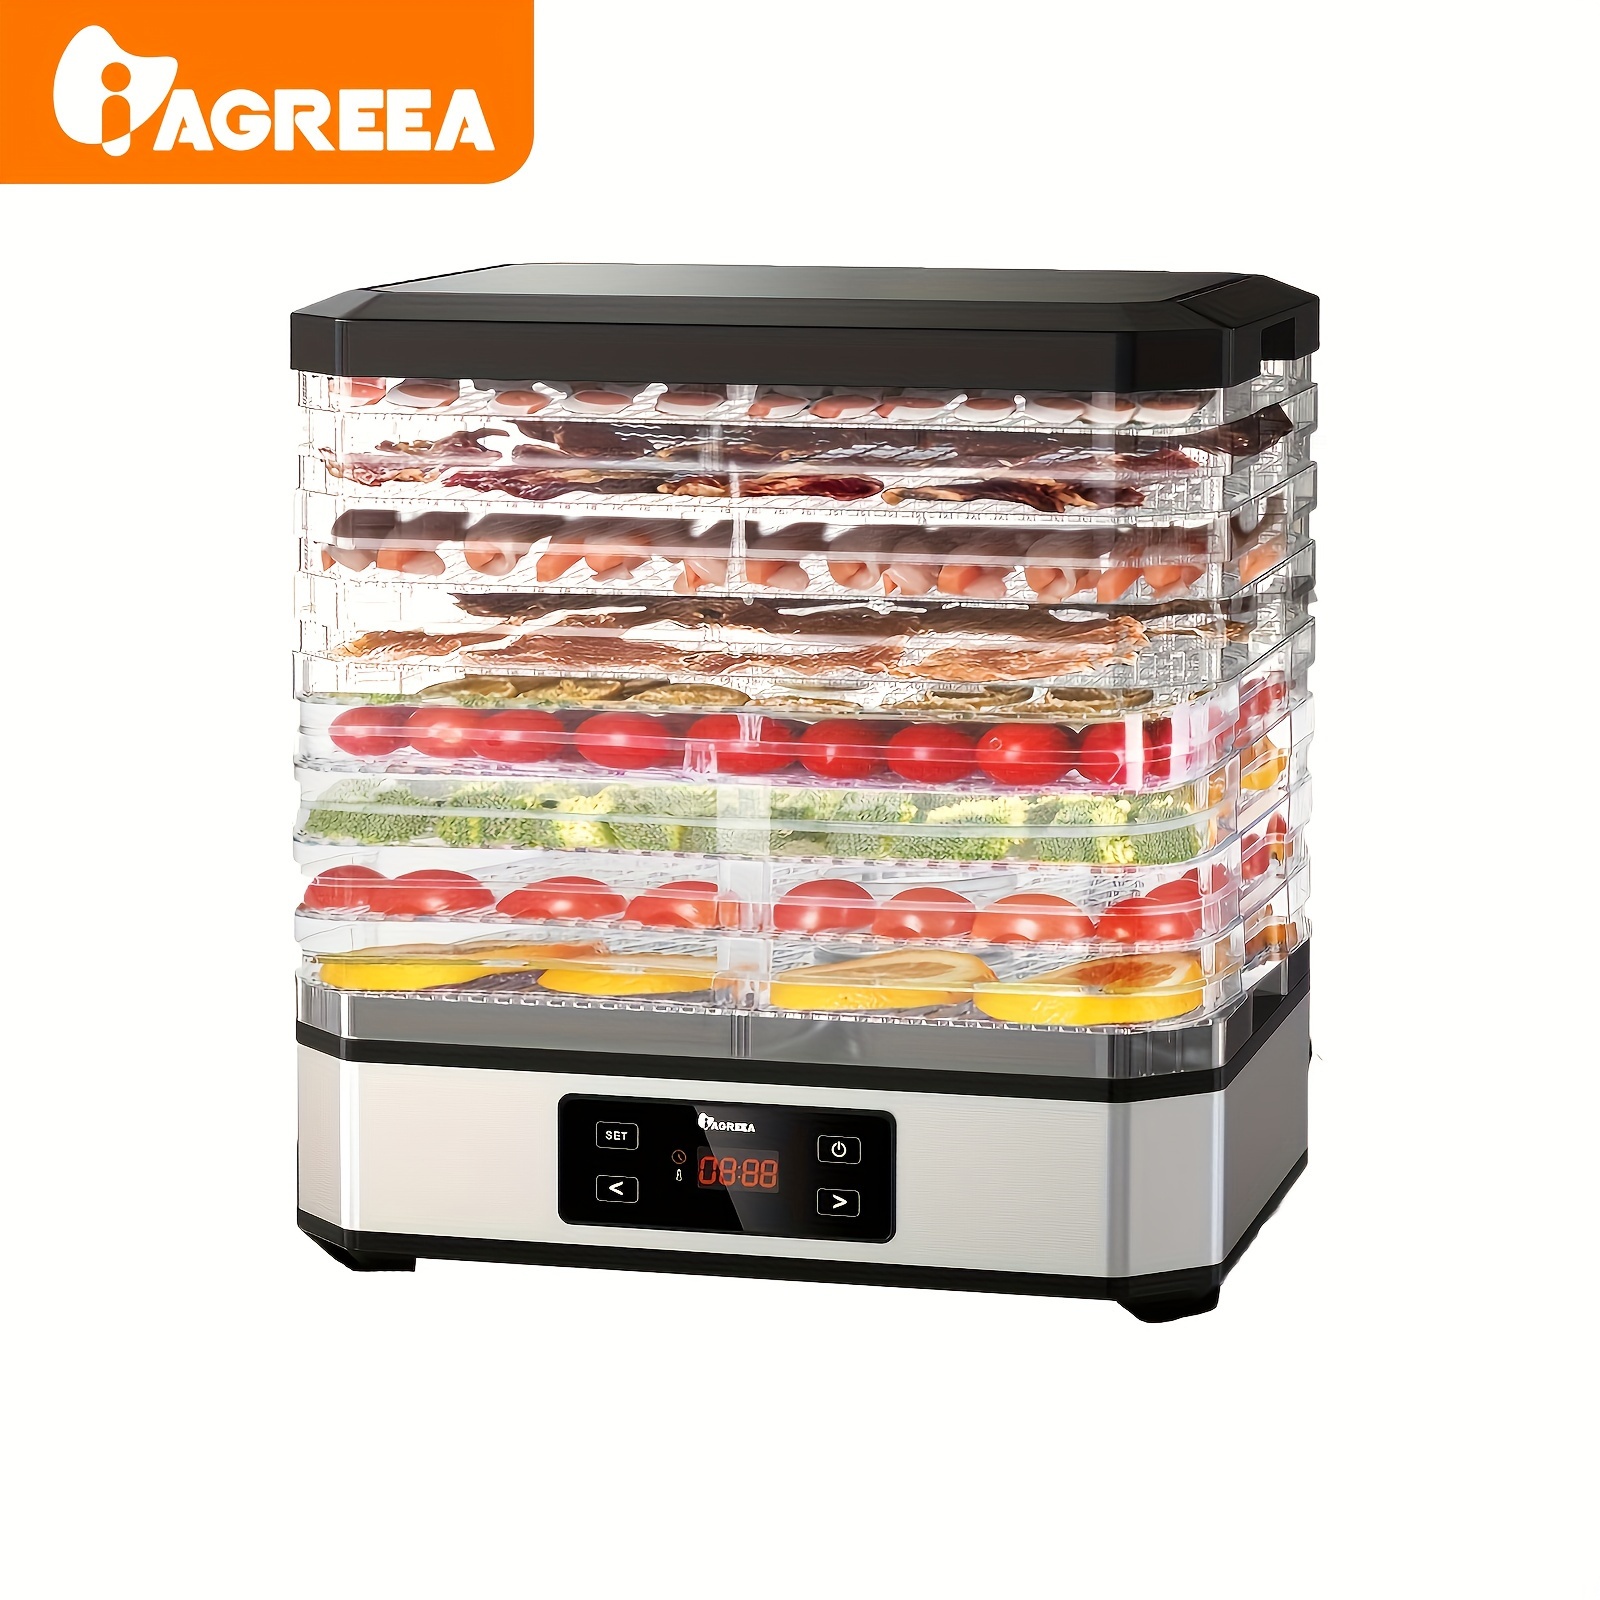  12 Layers Fruit Dryer Food Household Fruit Dryer Bean  Dissolving Pet Food Dehydration Air Drying Machine Keep Warm Function Dryer  for Jerky, Herb, Meat, Beef, Fruit And To Dry Vegetables: Home